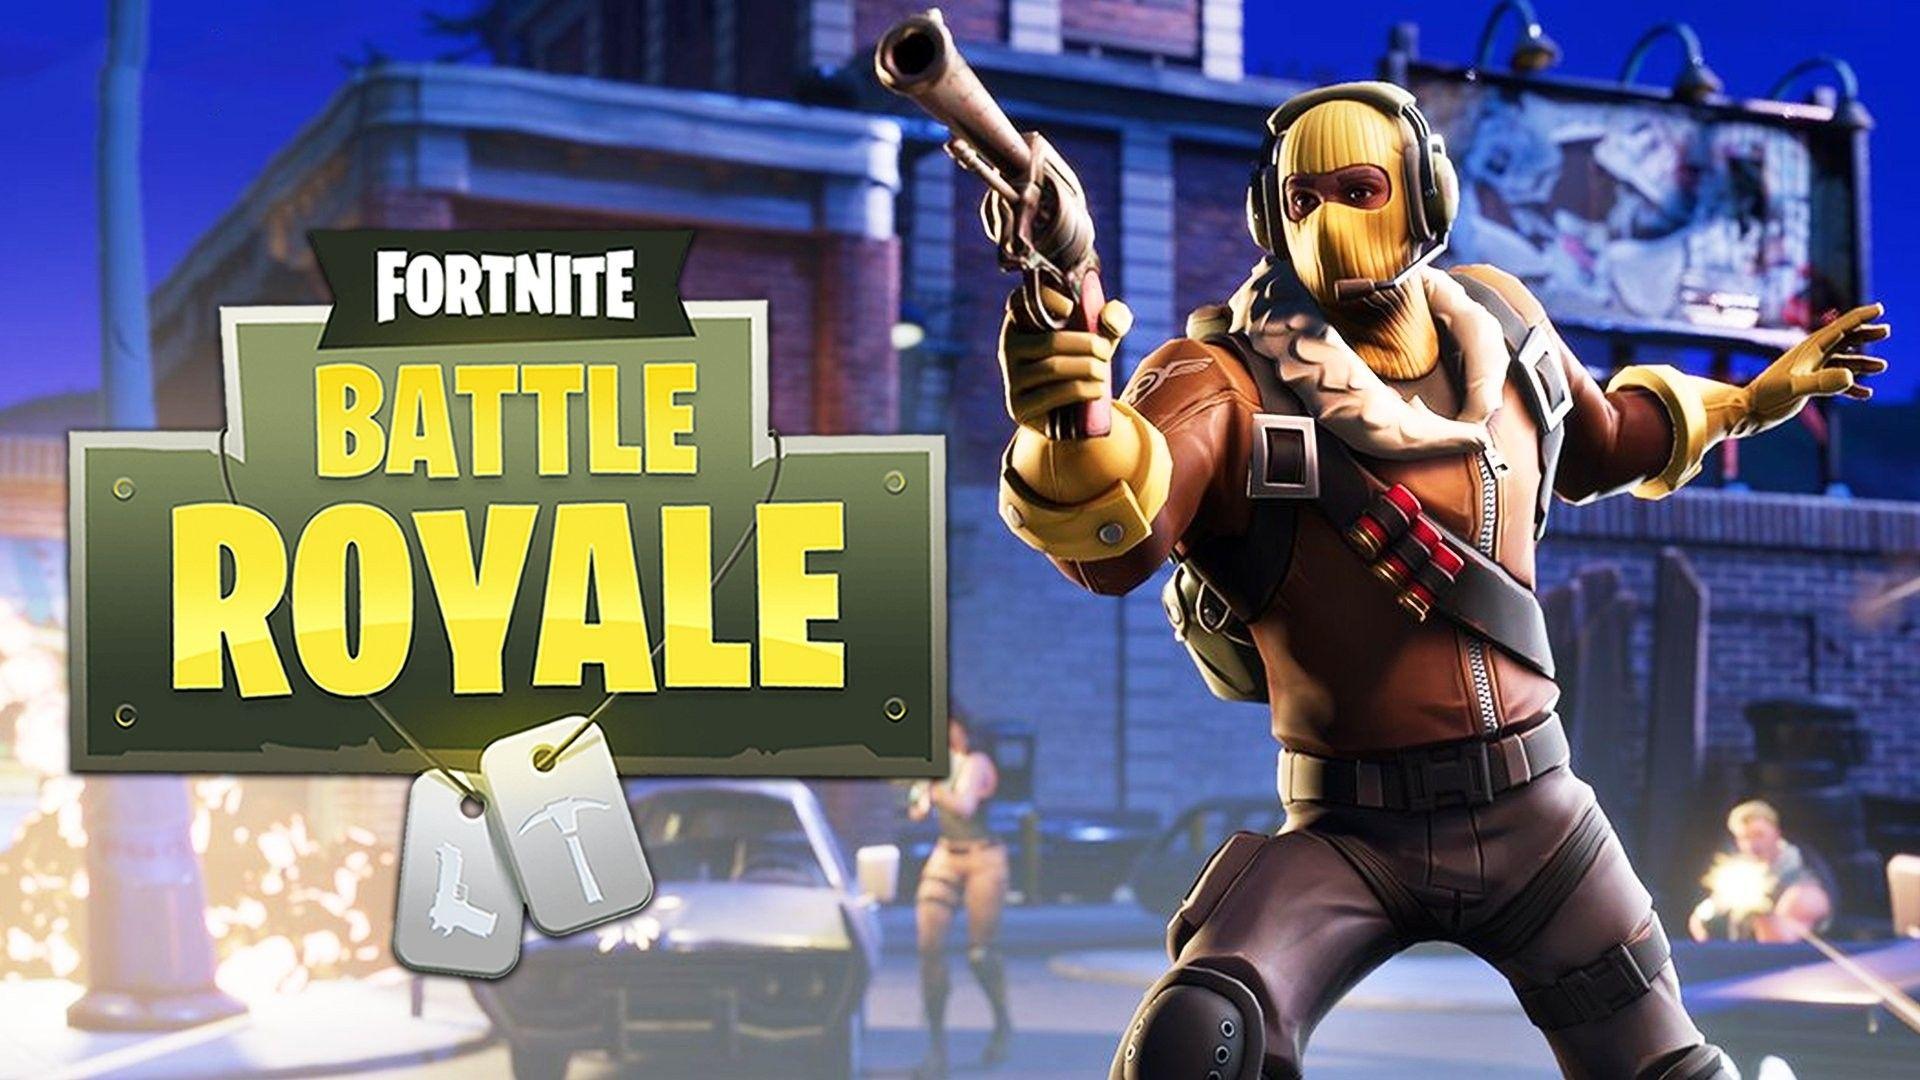 install this extension and enjoy hd backgrounds of fortnite battle download - fortnite battle royale download pc